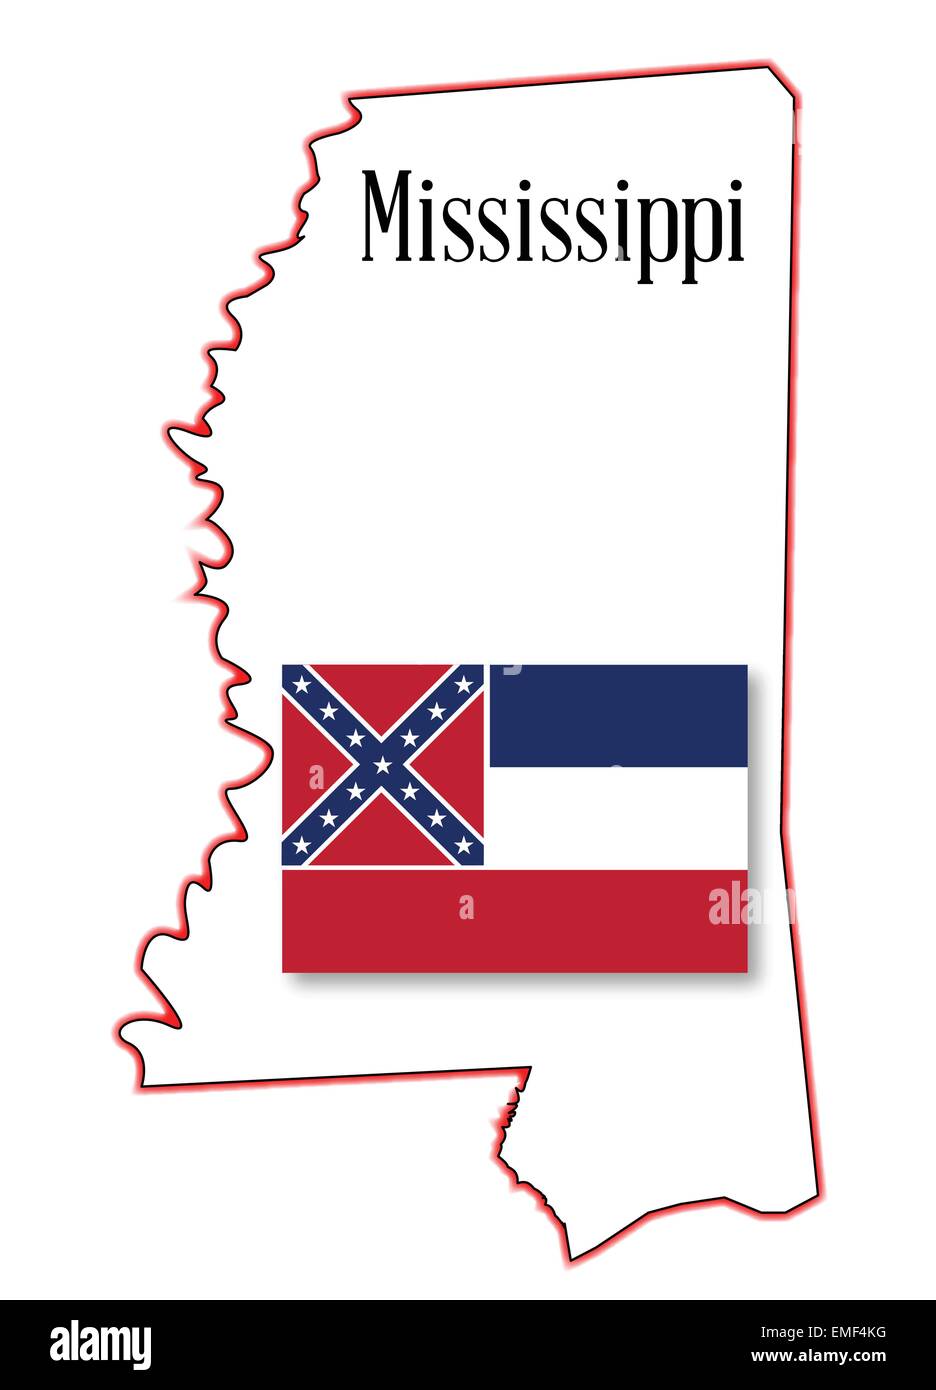 Mississippi State Map and Flag Stock Vector